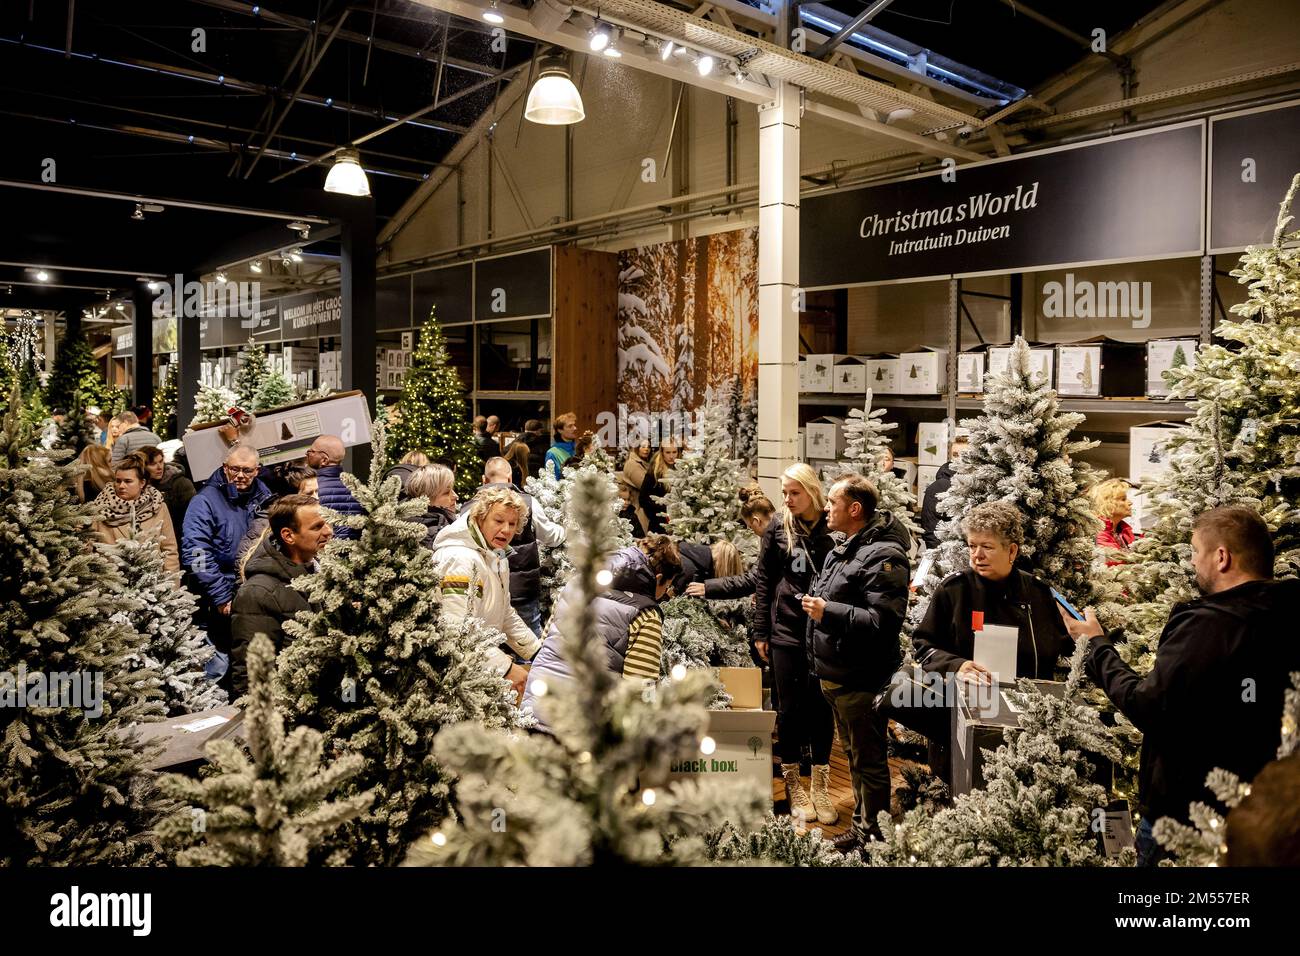 DUIVEN - Visitors to a garden center view offers during the sale of  Christmas items. Every year, the sale here on Boxing Day attracts thousands  of bargain hunters. ANP ROBIN VAN LONKHUIJSEN